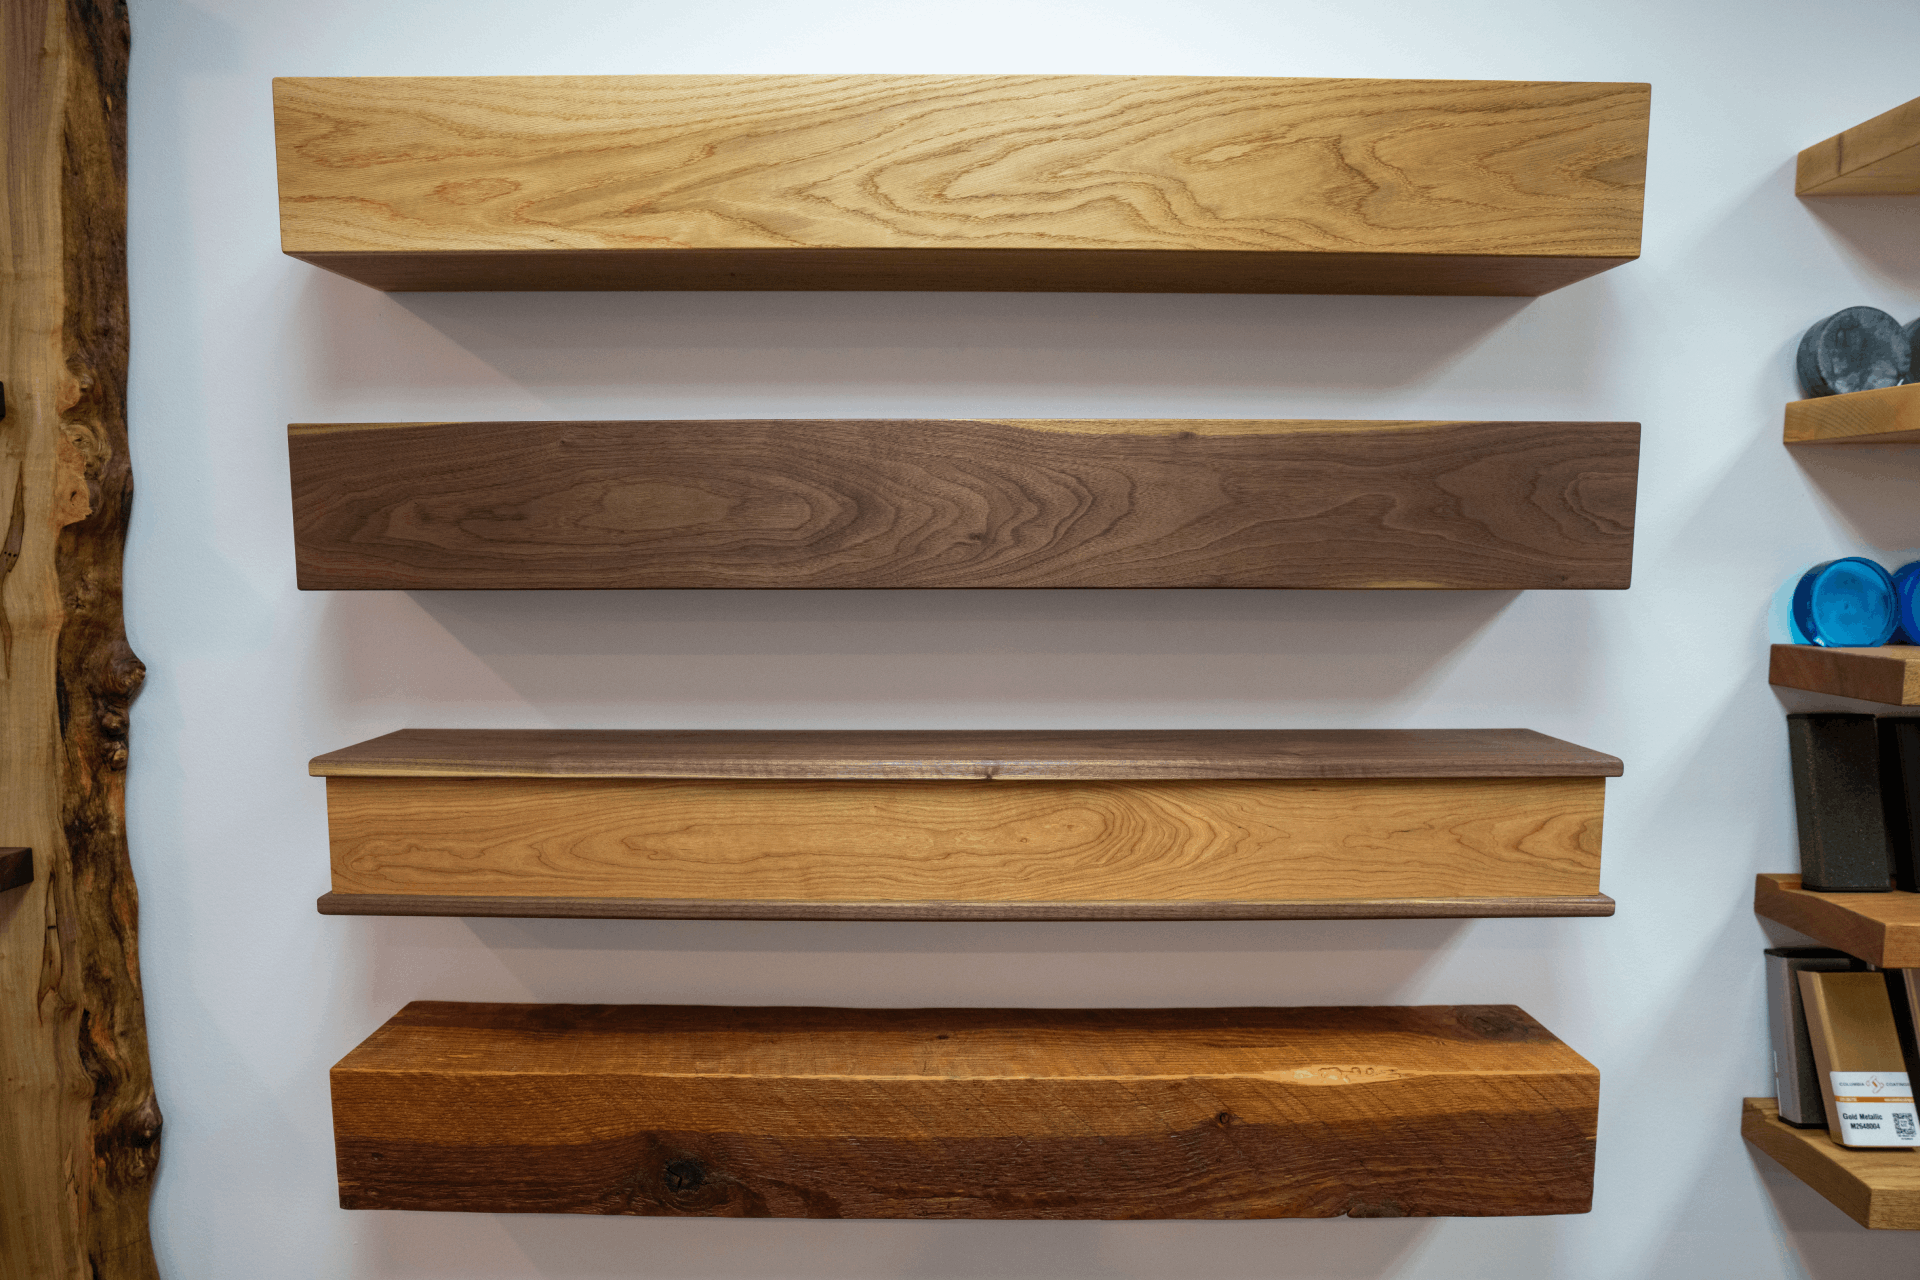 Wood Planks Shelves Plyboard Pre Cut For Diy Smooth Wood Plank For Shelf